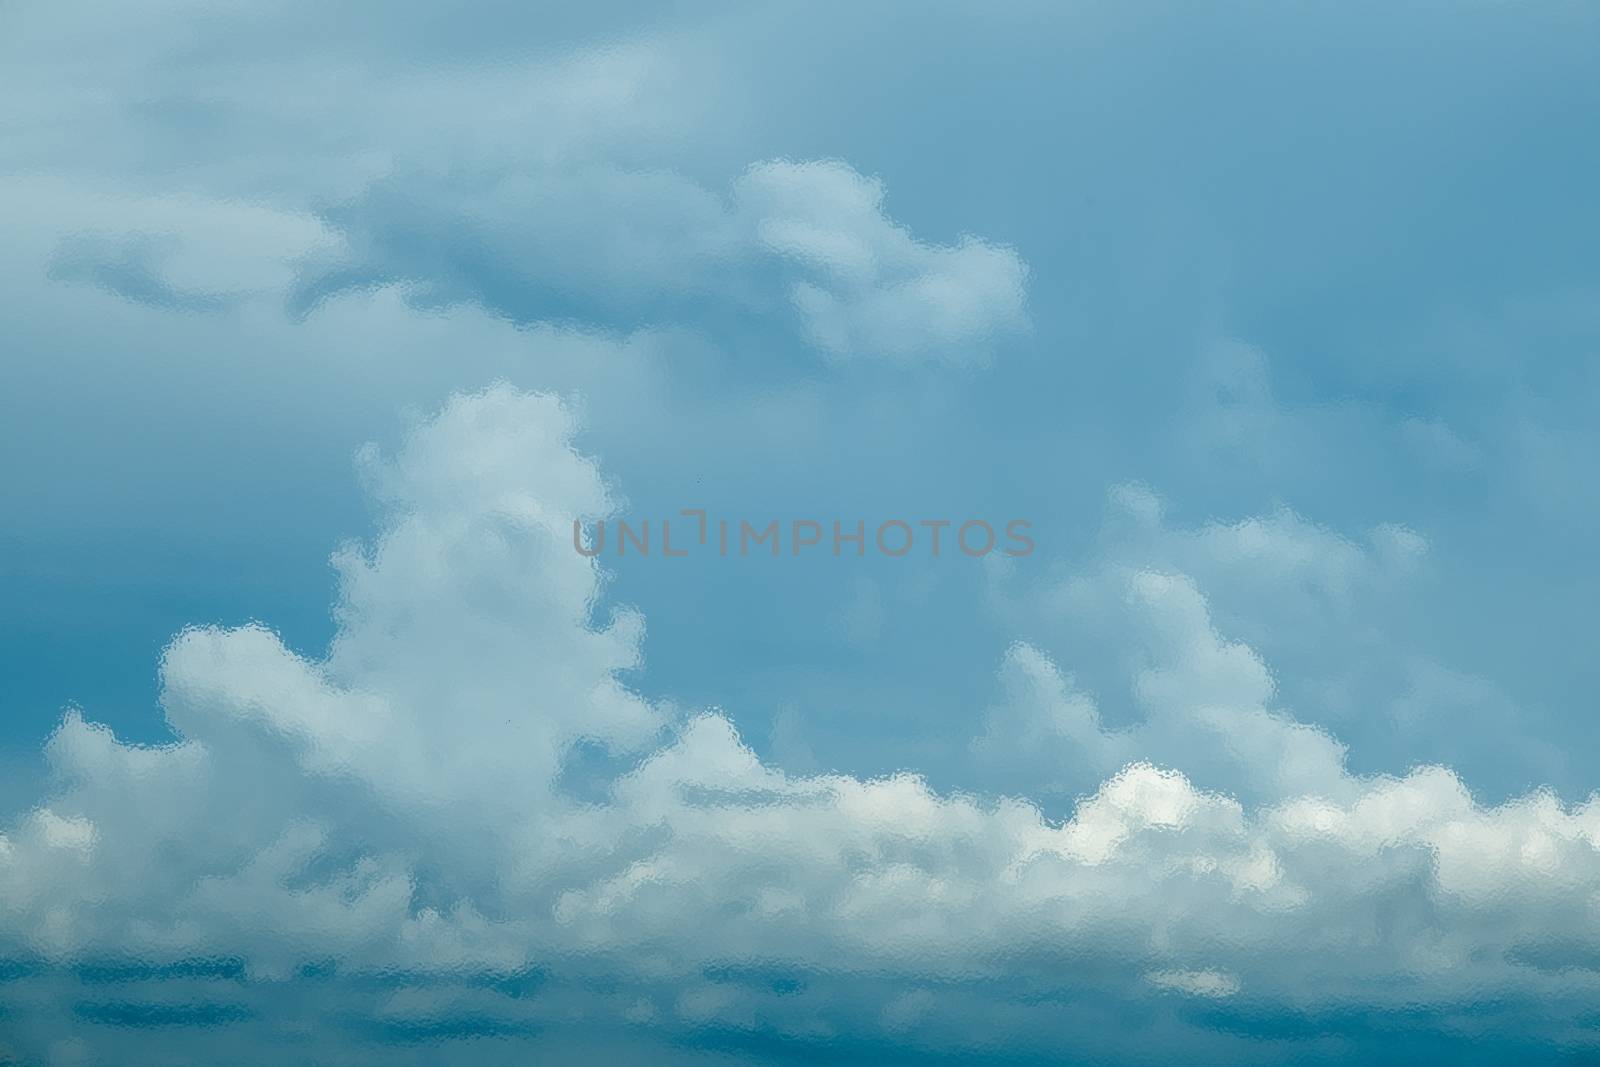 Blue sky with white cloud frosted glass texture as background. by peerapixs